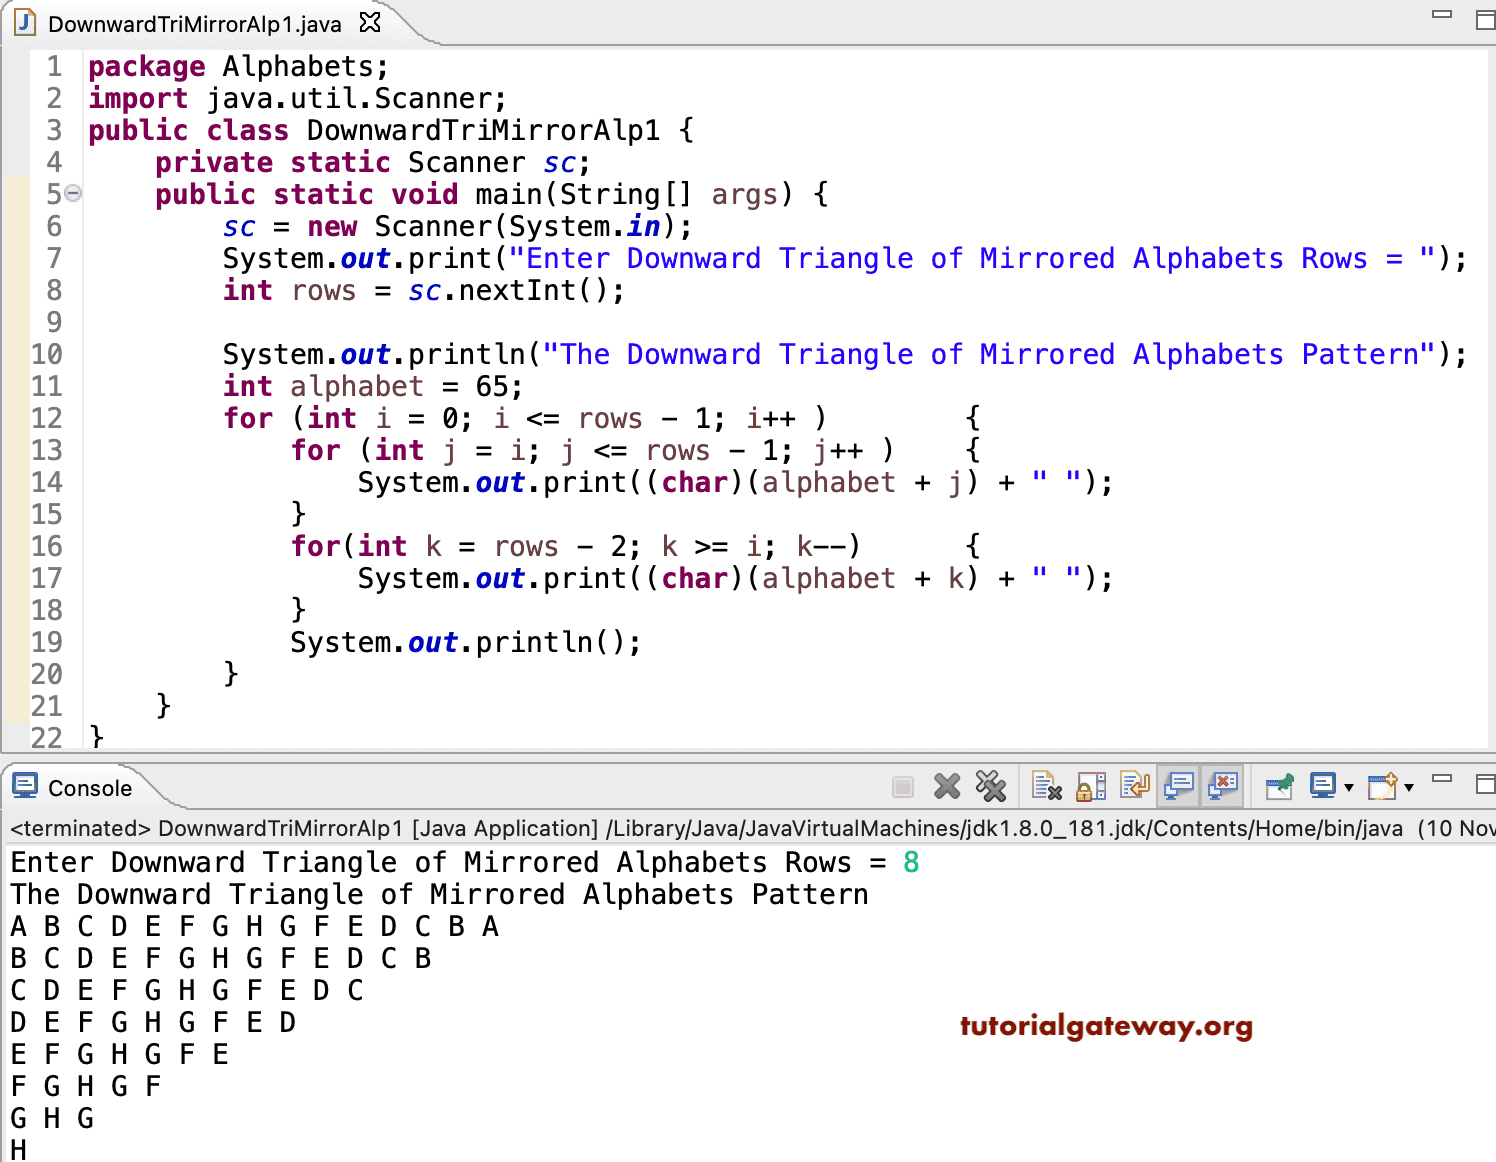 Java Program to Print Downward Triangle of Mirrored Alphabets Pattern